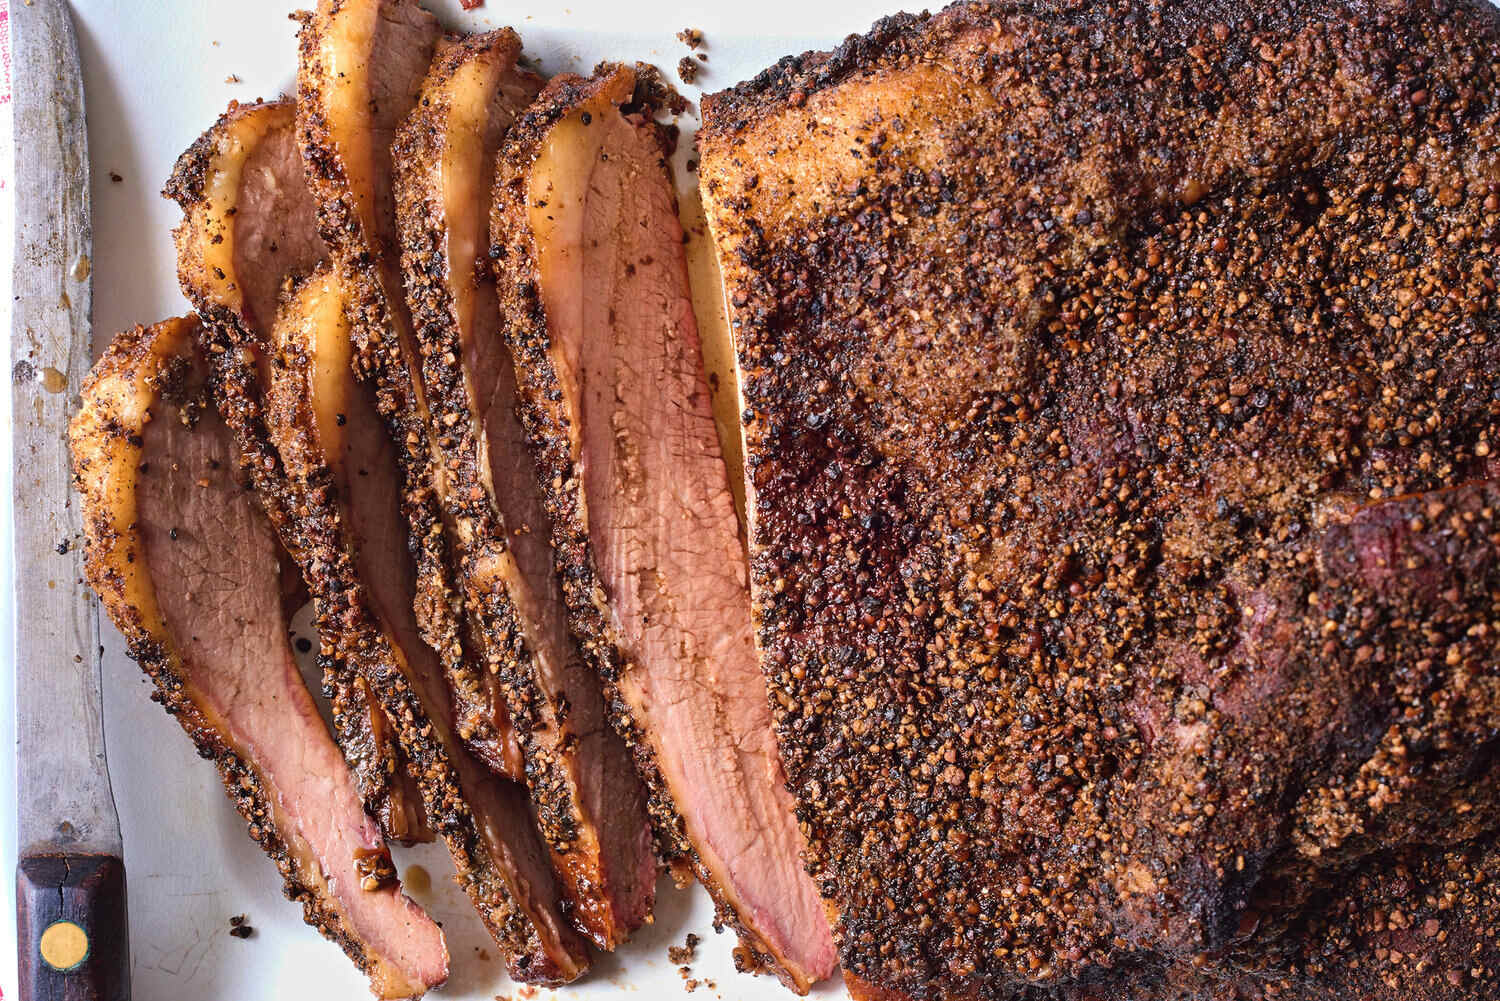 How To Store Cooked Brisket Overnight